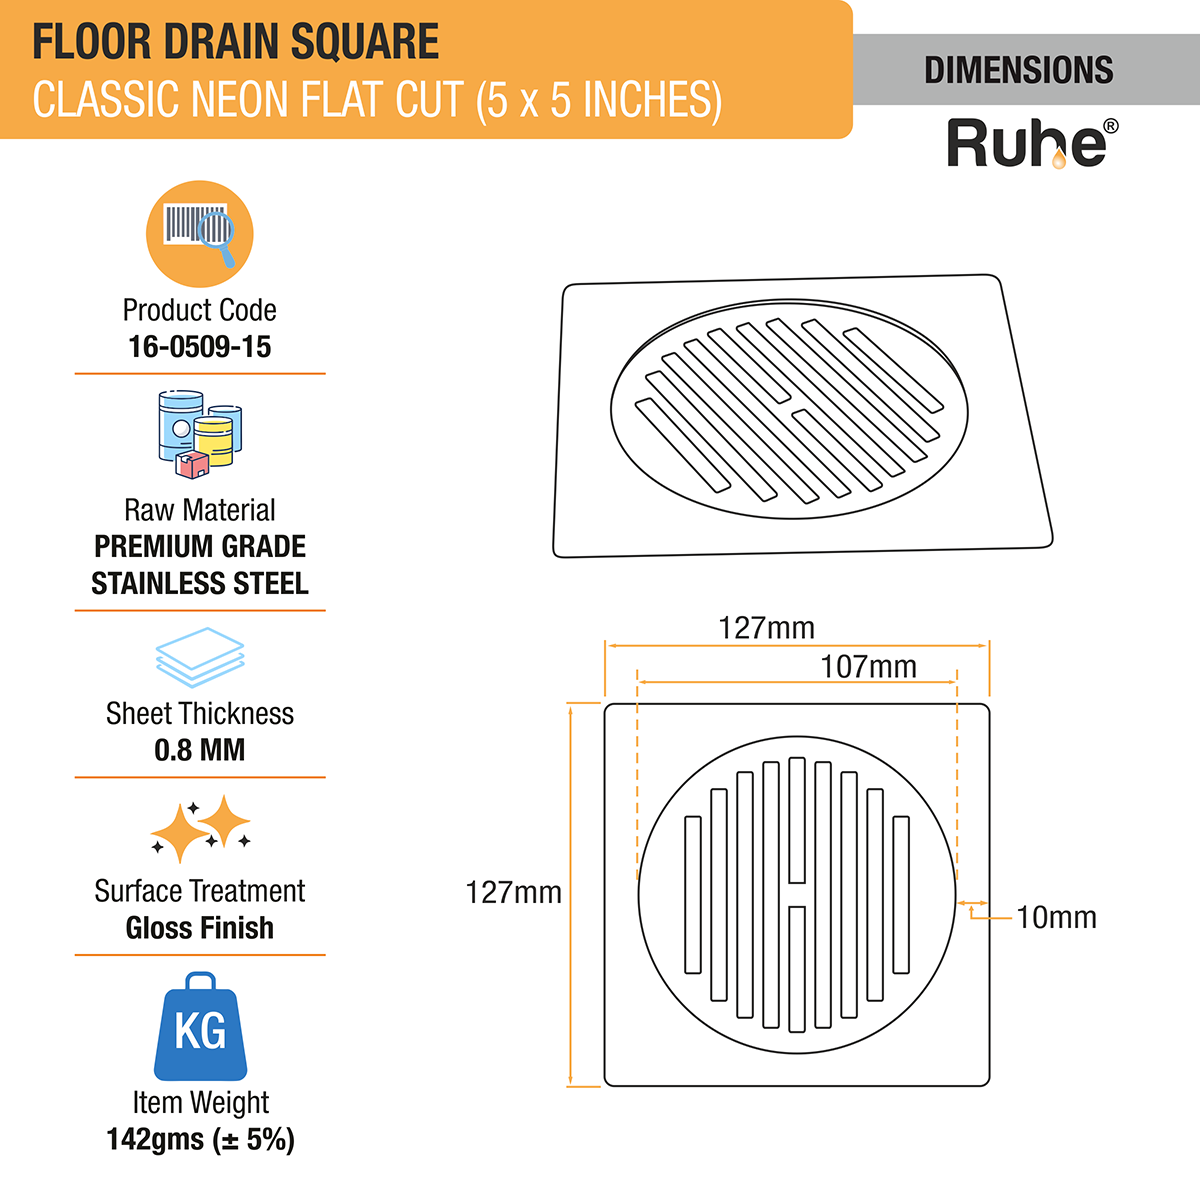 Classic Neon Square Flat Cut Floor Drain (5 x 5 inches) dimensions and size